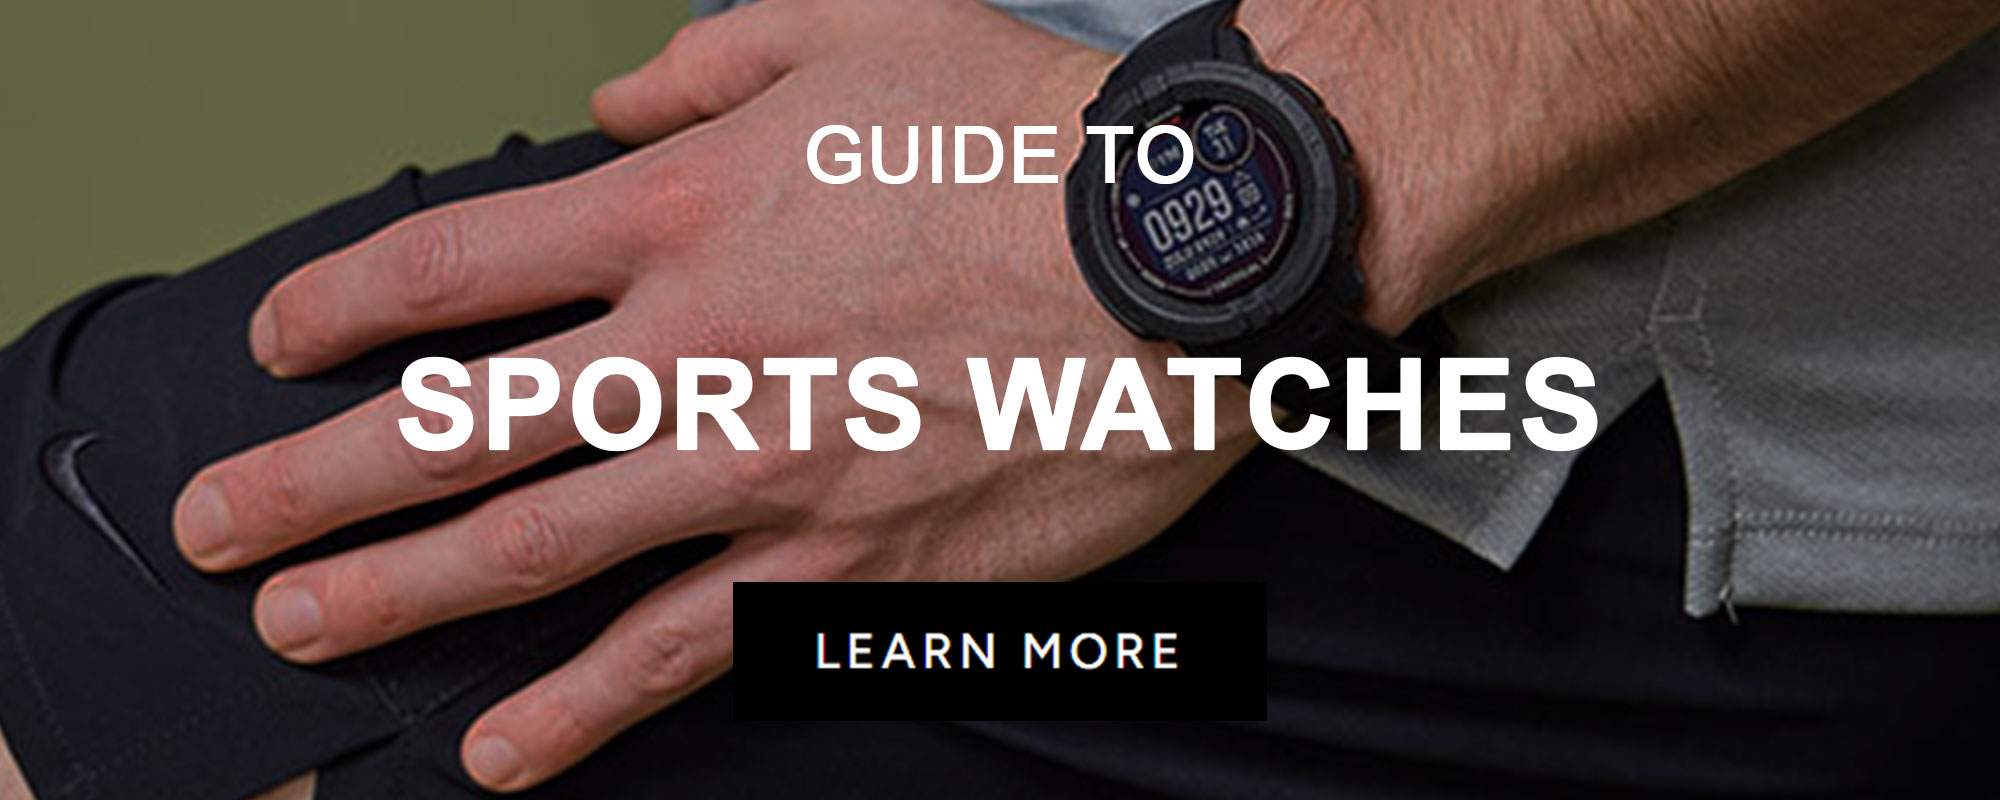 GUIDES_EQUIP_SportsWatches.jpg